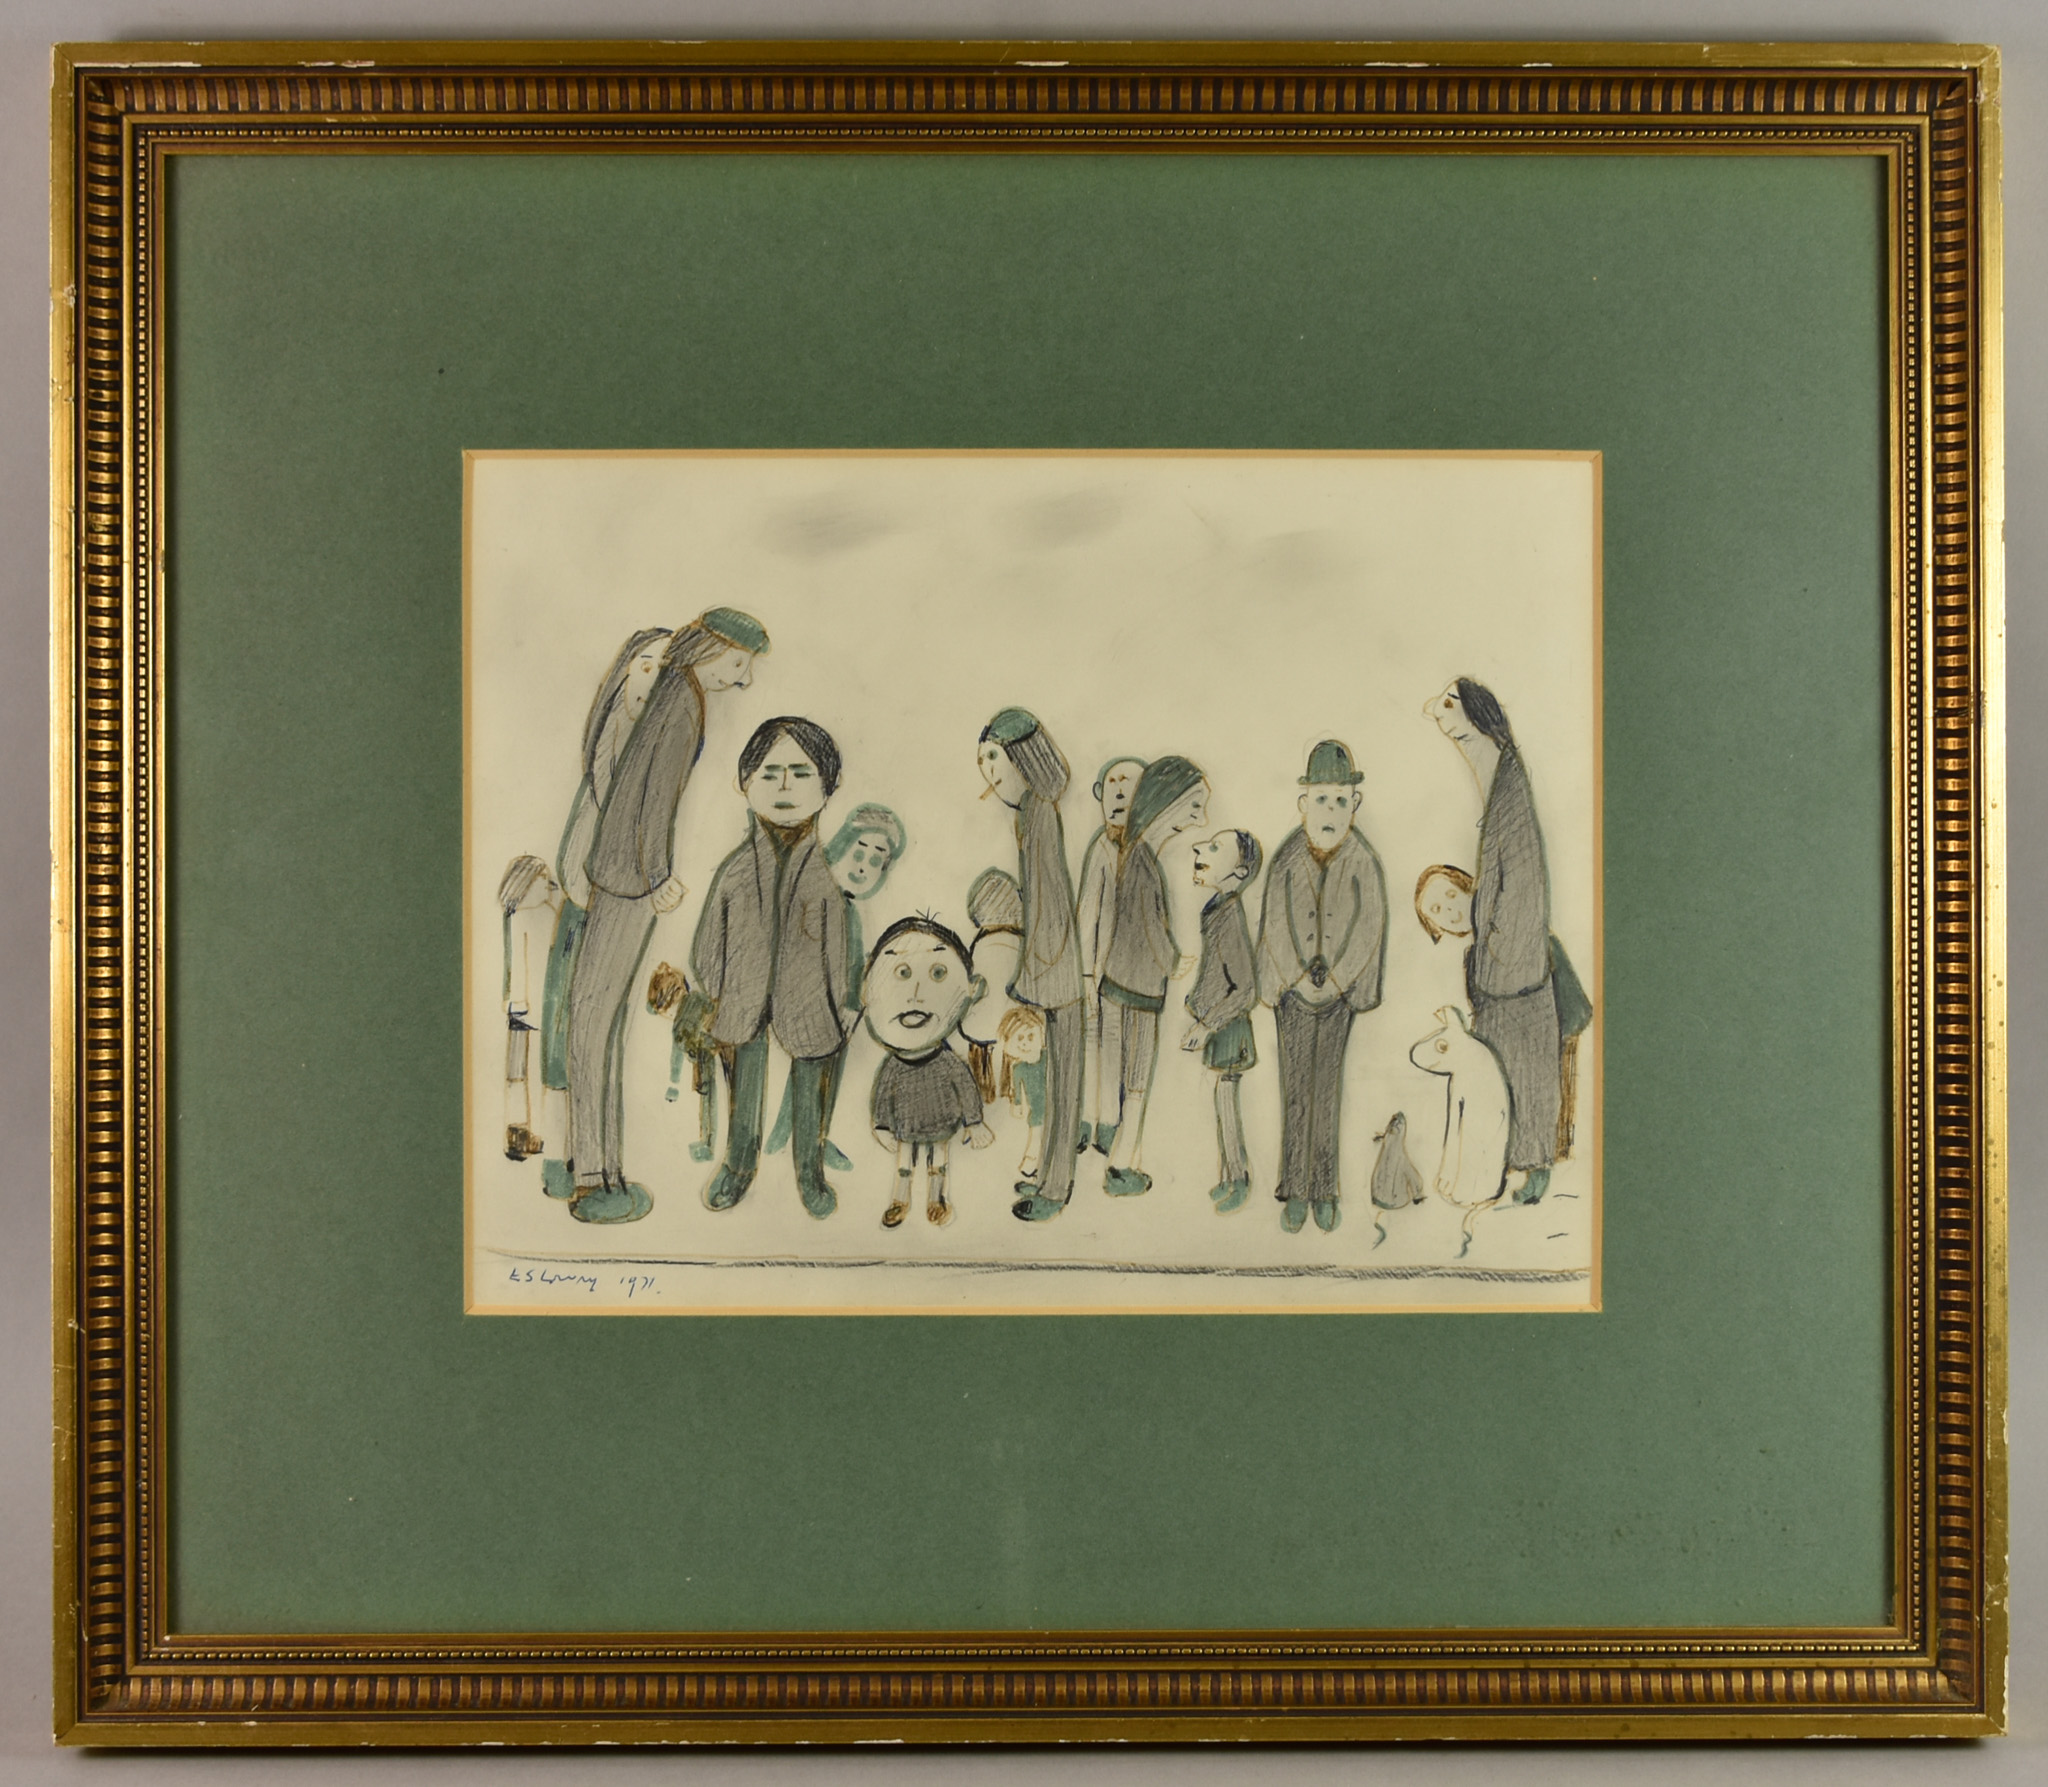 ARR Laurence Stephen Lowry (1887-1976) - Pen and inkdrawing - Study of people and animals, signed - Image 2 of 3